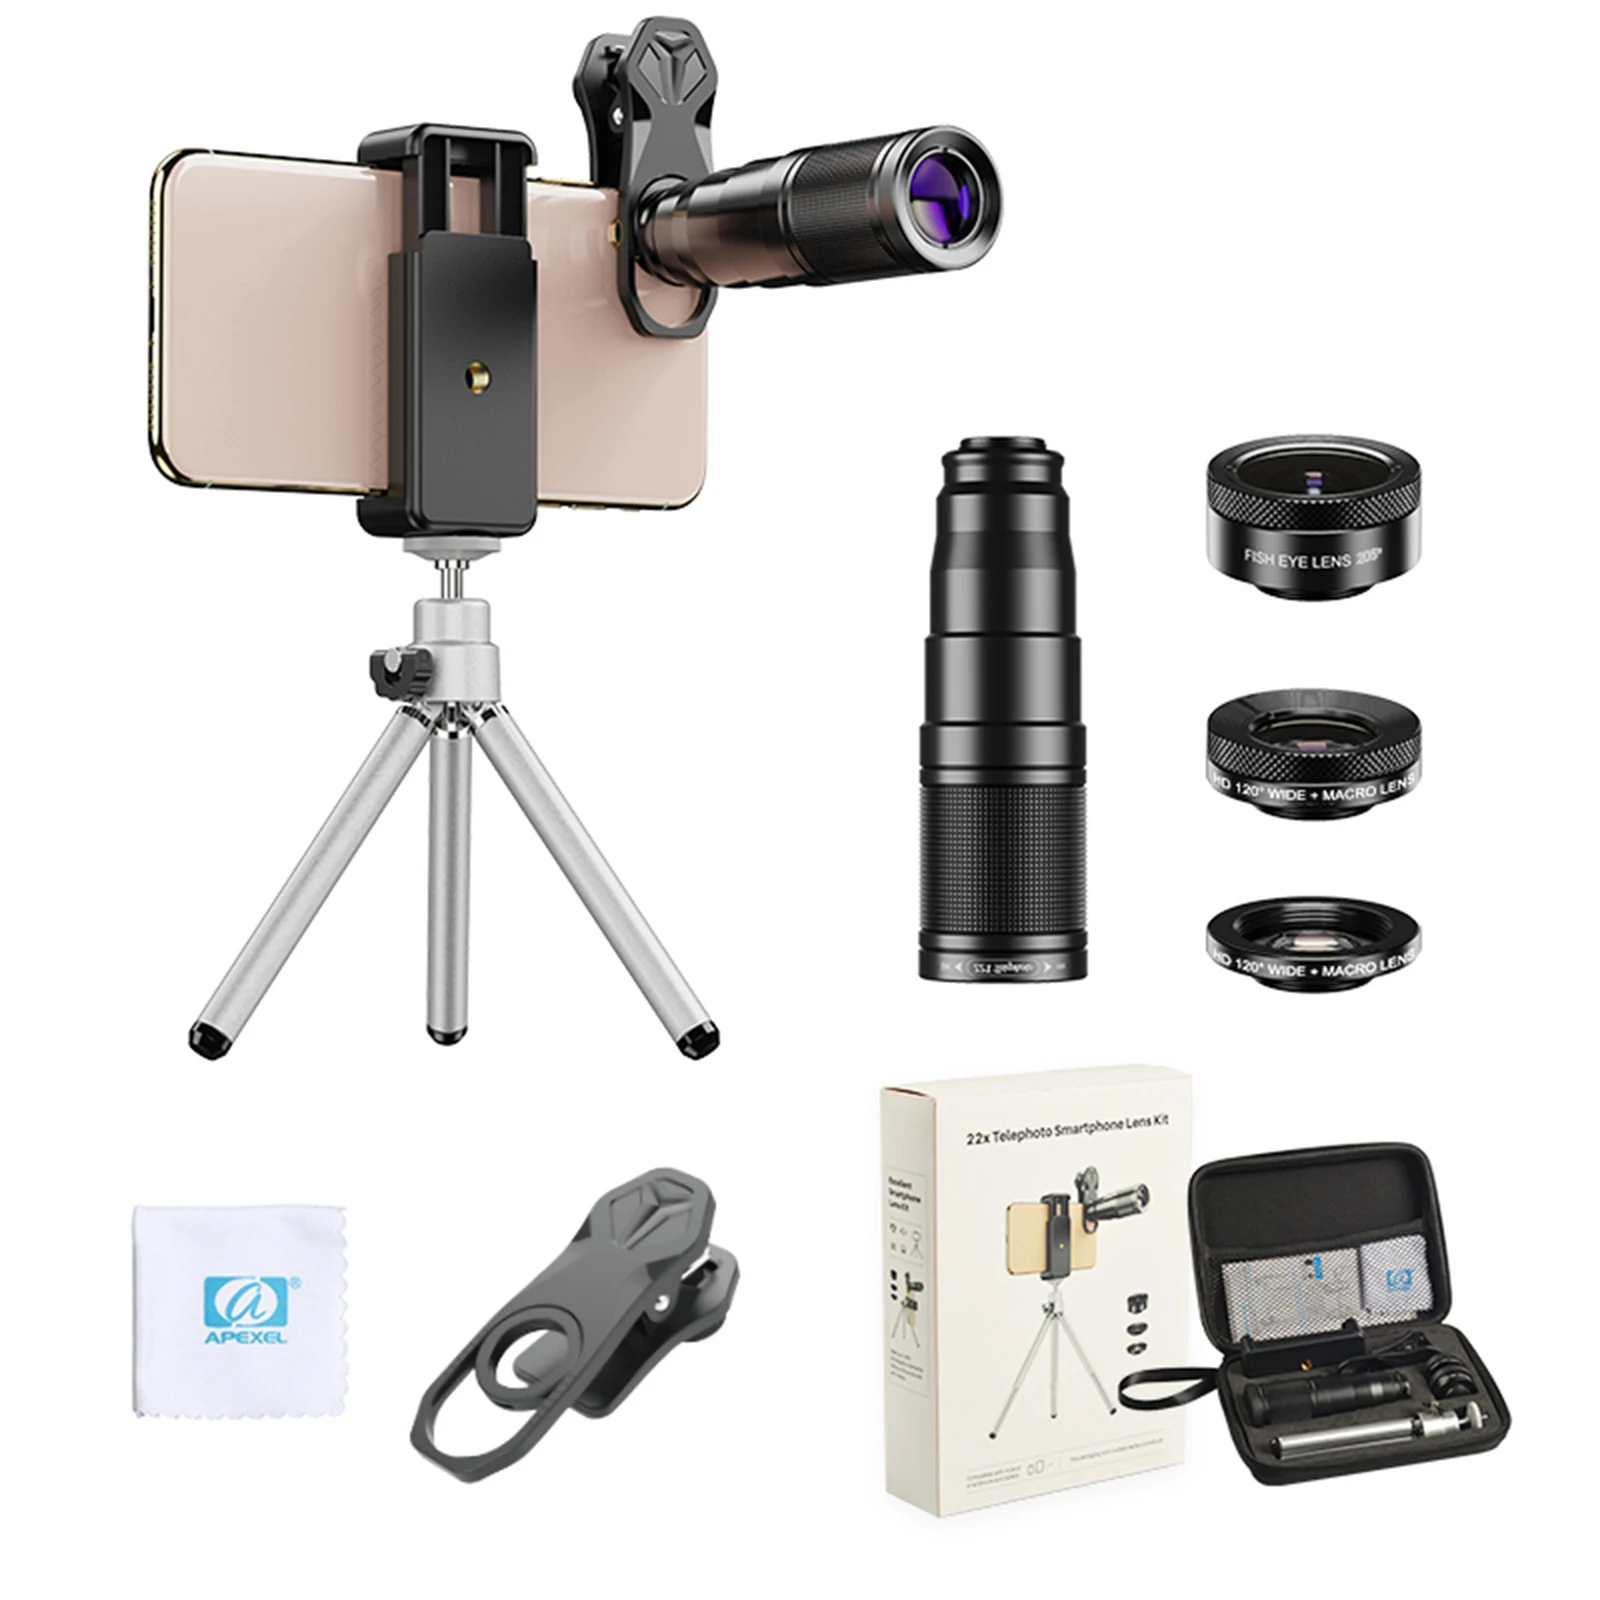 22X Zoom Clip-on Universal Telephoto Camera Smartphone Lens Kit  Lens Come with Portable Bag, Easy to Carry